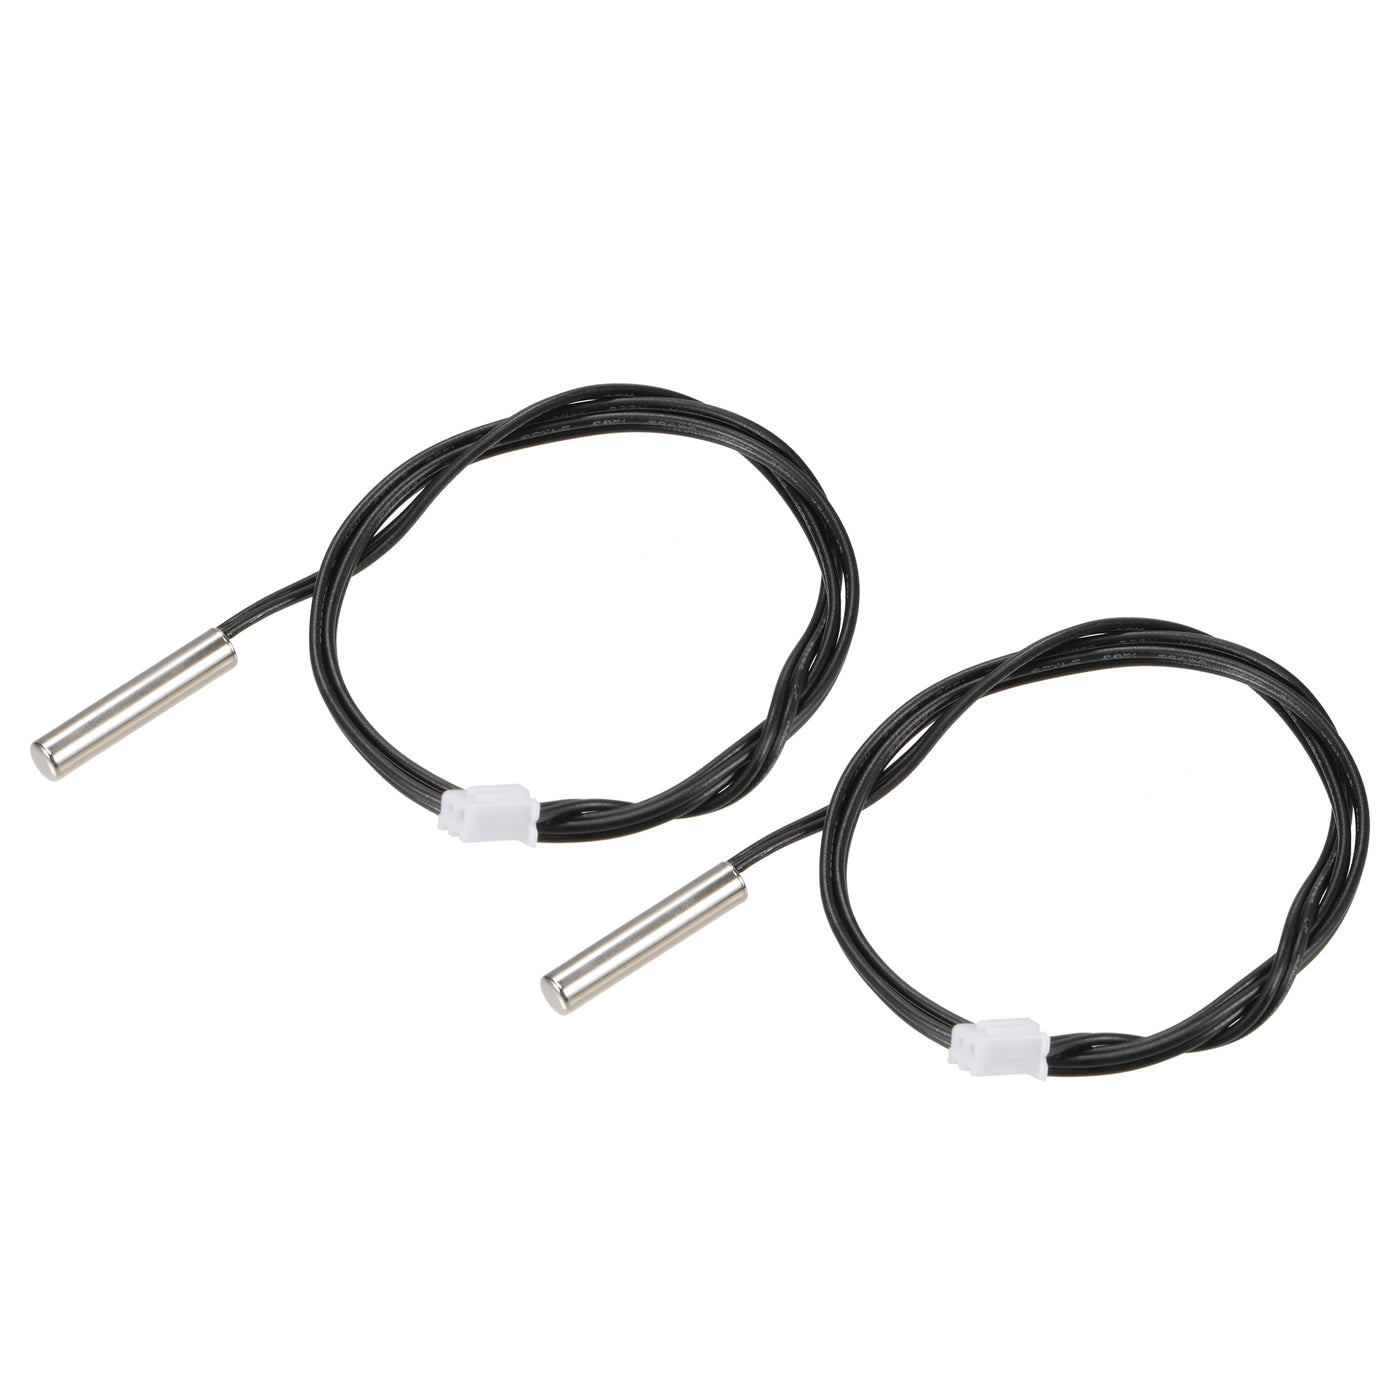 uxcell Uxcell 2pcs 10K Temperature Sensor Probe, Stainless Steel NTC Thermal Sensor Probe 50cm Digital Thermometer Extension Cable